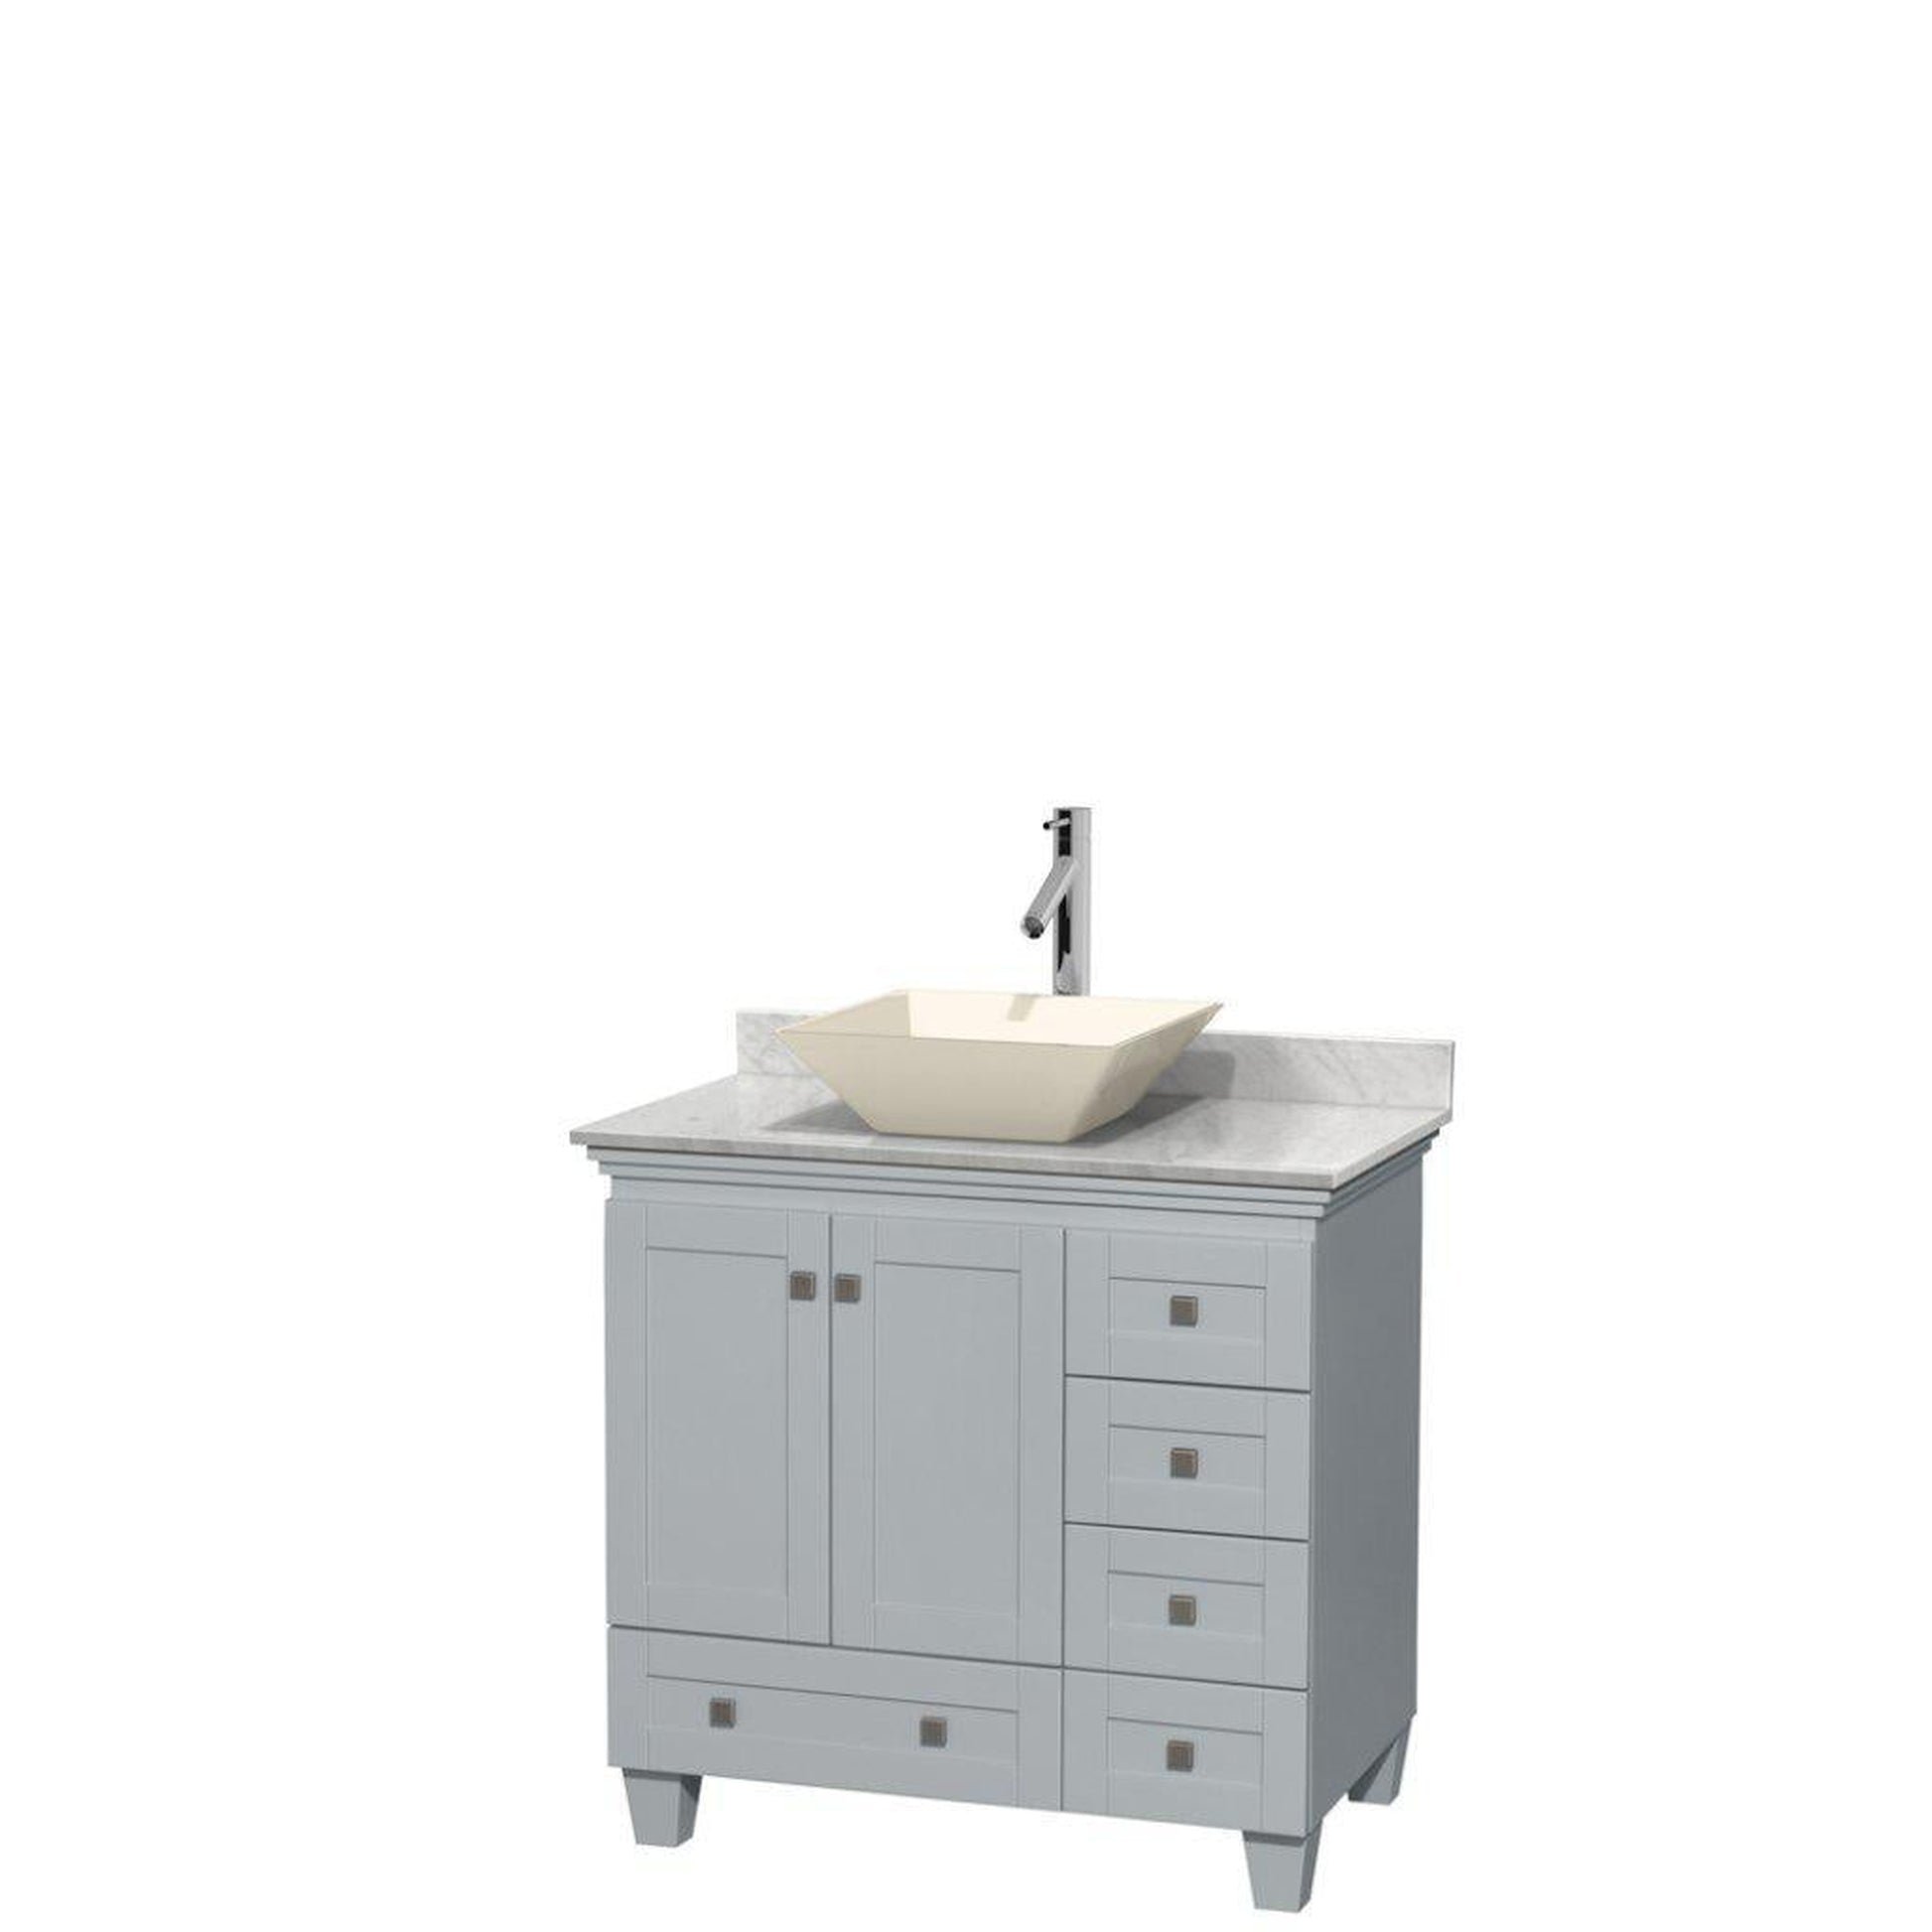 Wyndham Collection Acclaim 36" Single Bathroom Oyster Gray Vanity With White Carrara Marble Countertop And Pyra Bone Porcelain Sink